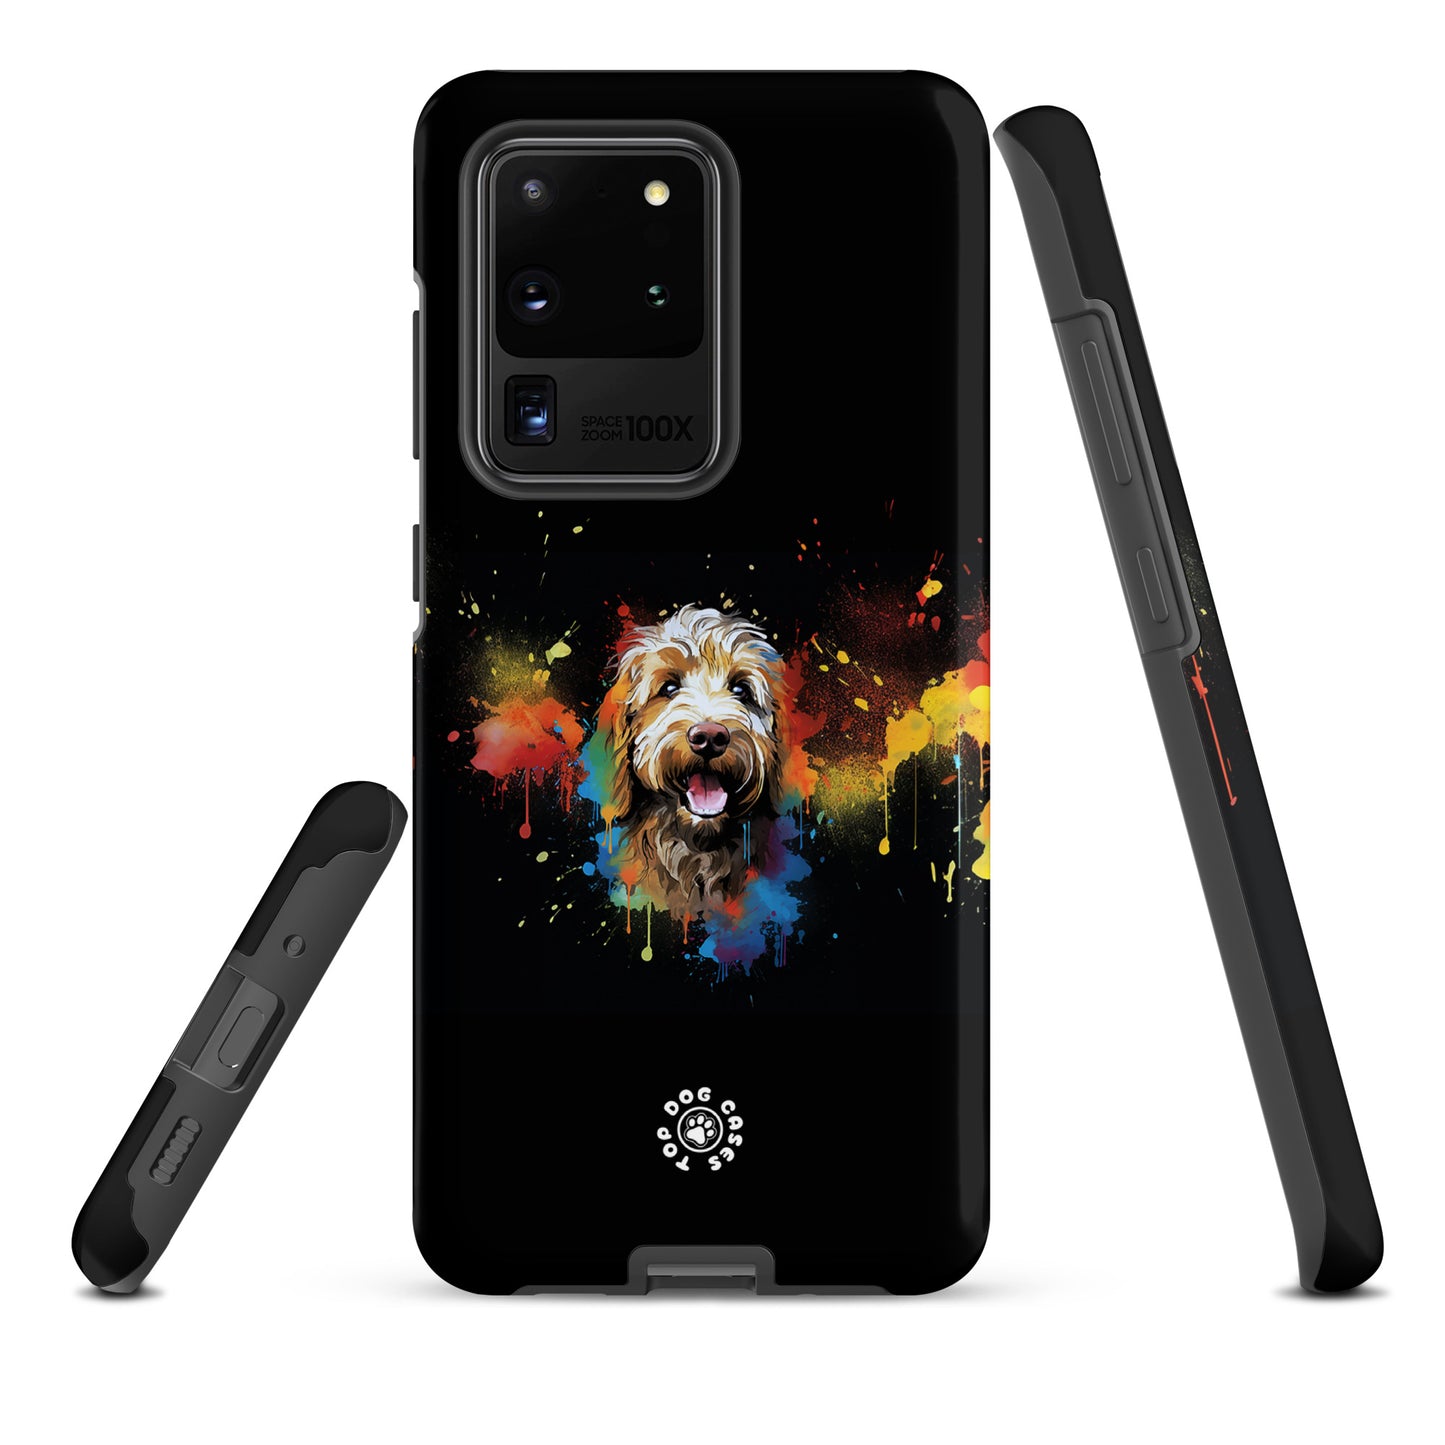 Goldendoodle - Colorful Phone Case - Samsung - Top Dog Cases - #ColorfulPhoneCases, #DogPhoneCase, #dogs, #Goldendoodle, #Samsung, #SamsungGalaxy, #SamsungGalaxyCase, #SamsungGalaxyS10, #SamsungGalaxyS20, #SamsungGalaxyS21, #SamsungGalaxyS22, #SamsungGalaxyS22Ultra, #SamsungGalaxyS23, #SamsungGalaxyS23Plus, #SamsungGalaxyS23Ultra, #SamsungPhoneCase, SamsungGalaxyS20Plus, SamsungGalaxyS22Plus